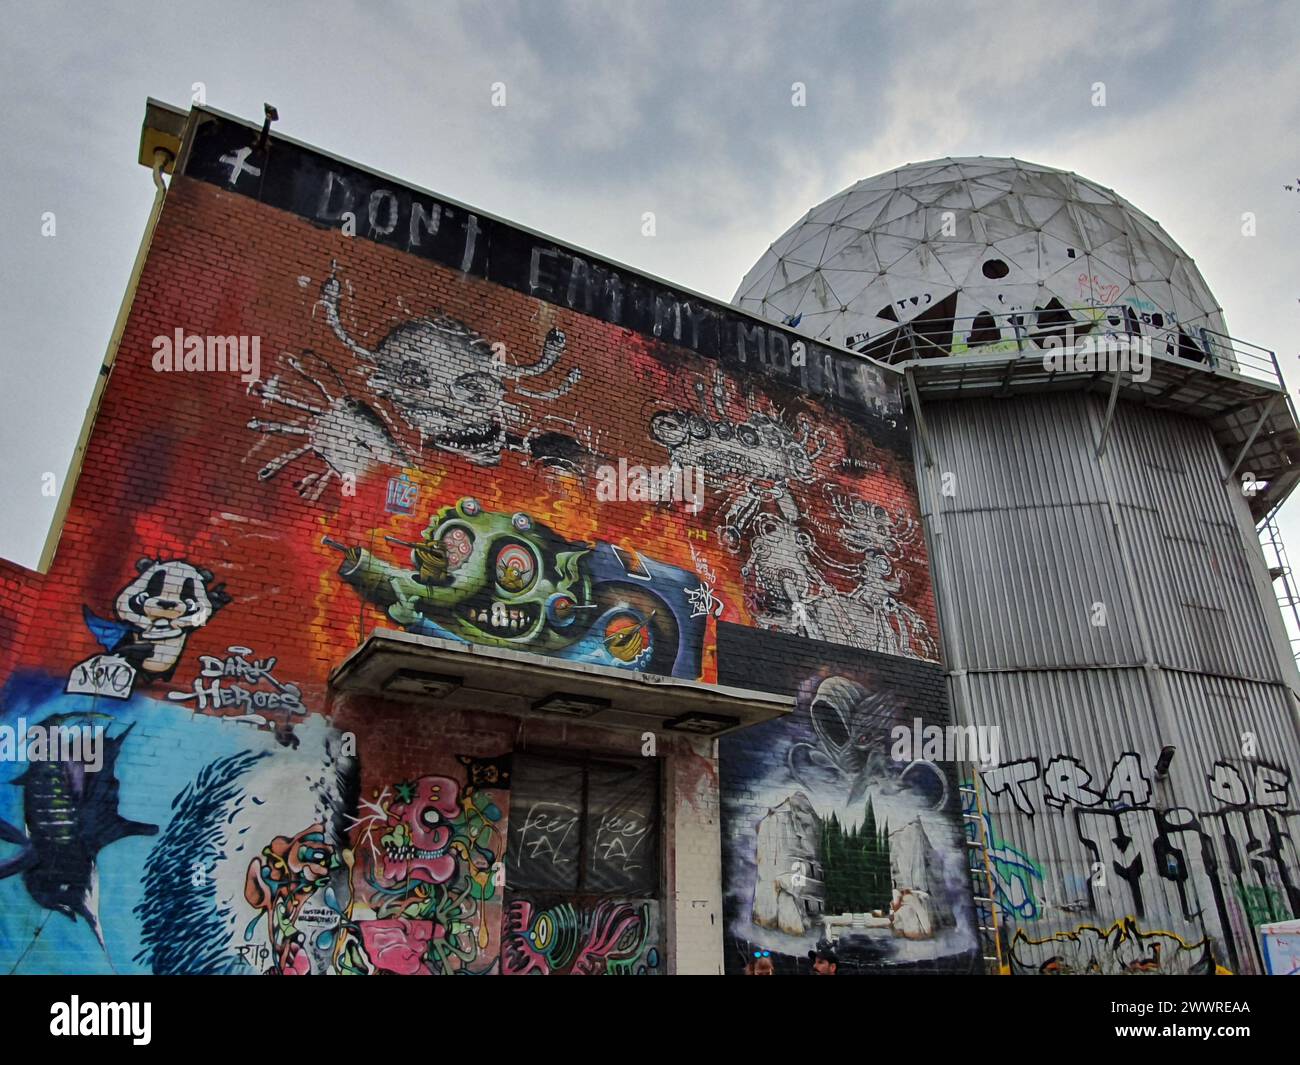 Graffiti-covered building beside a tall urban structure Stock Photo